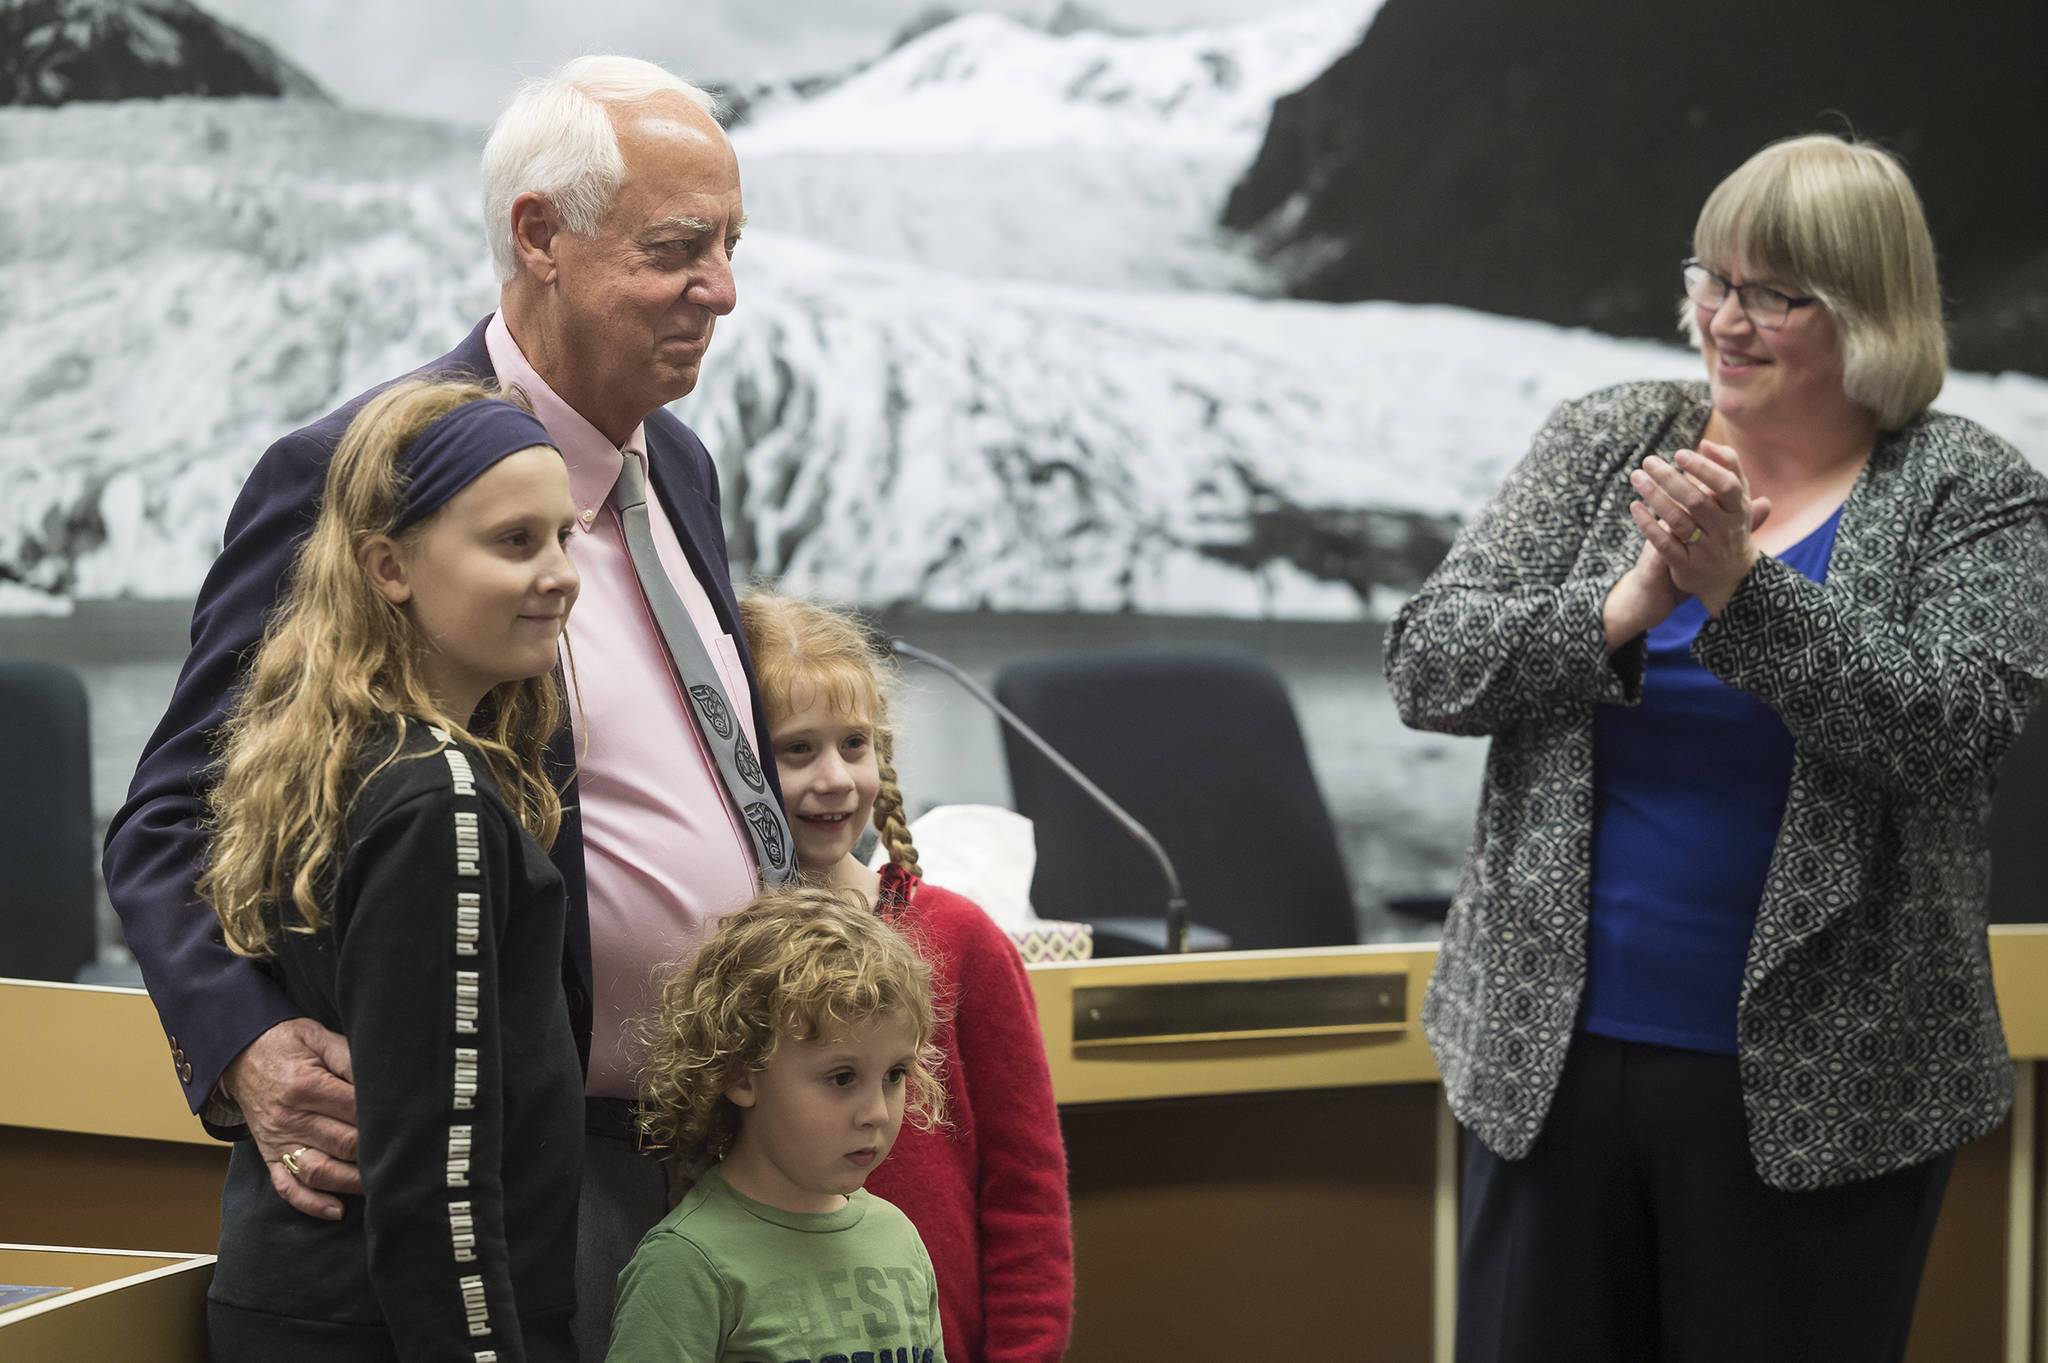 Outgoing Mayor Ken Koelsch, surrounded by his grandchildren, is acknowledged for his service by incoming Mayor Beth Weldon in a crowded Assembly chambers on Monday, Oct. 15, 2018. (Michael Penn | Juneau Empire)